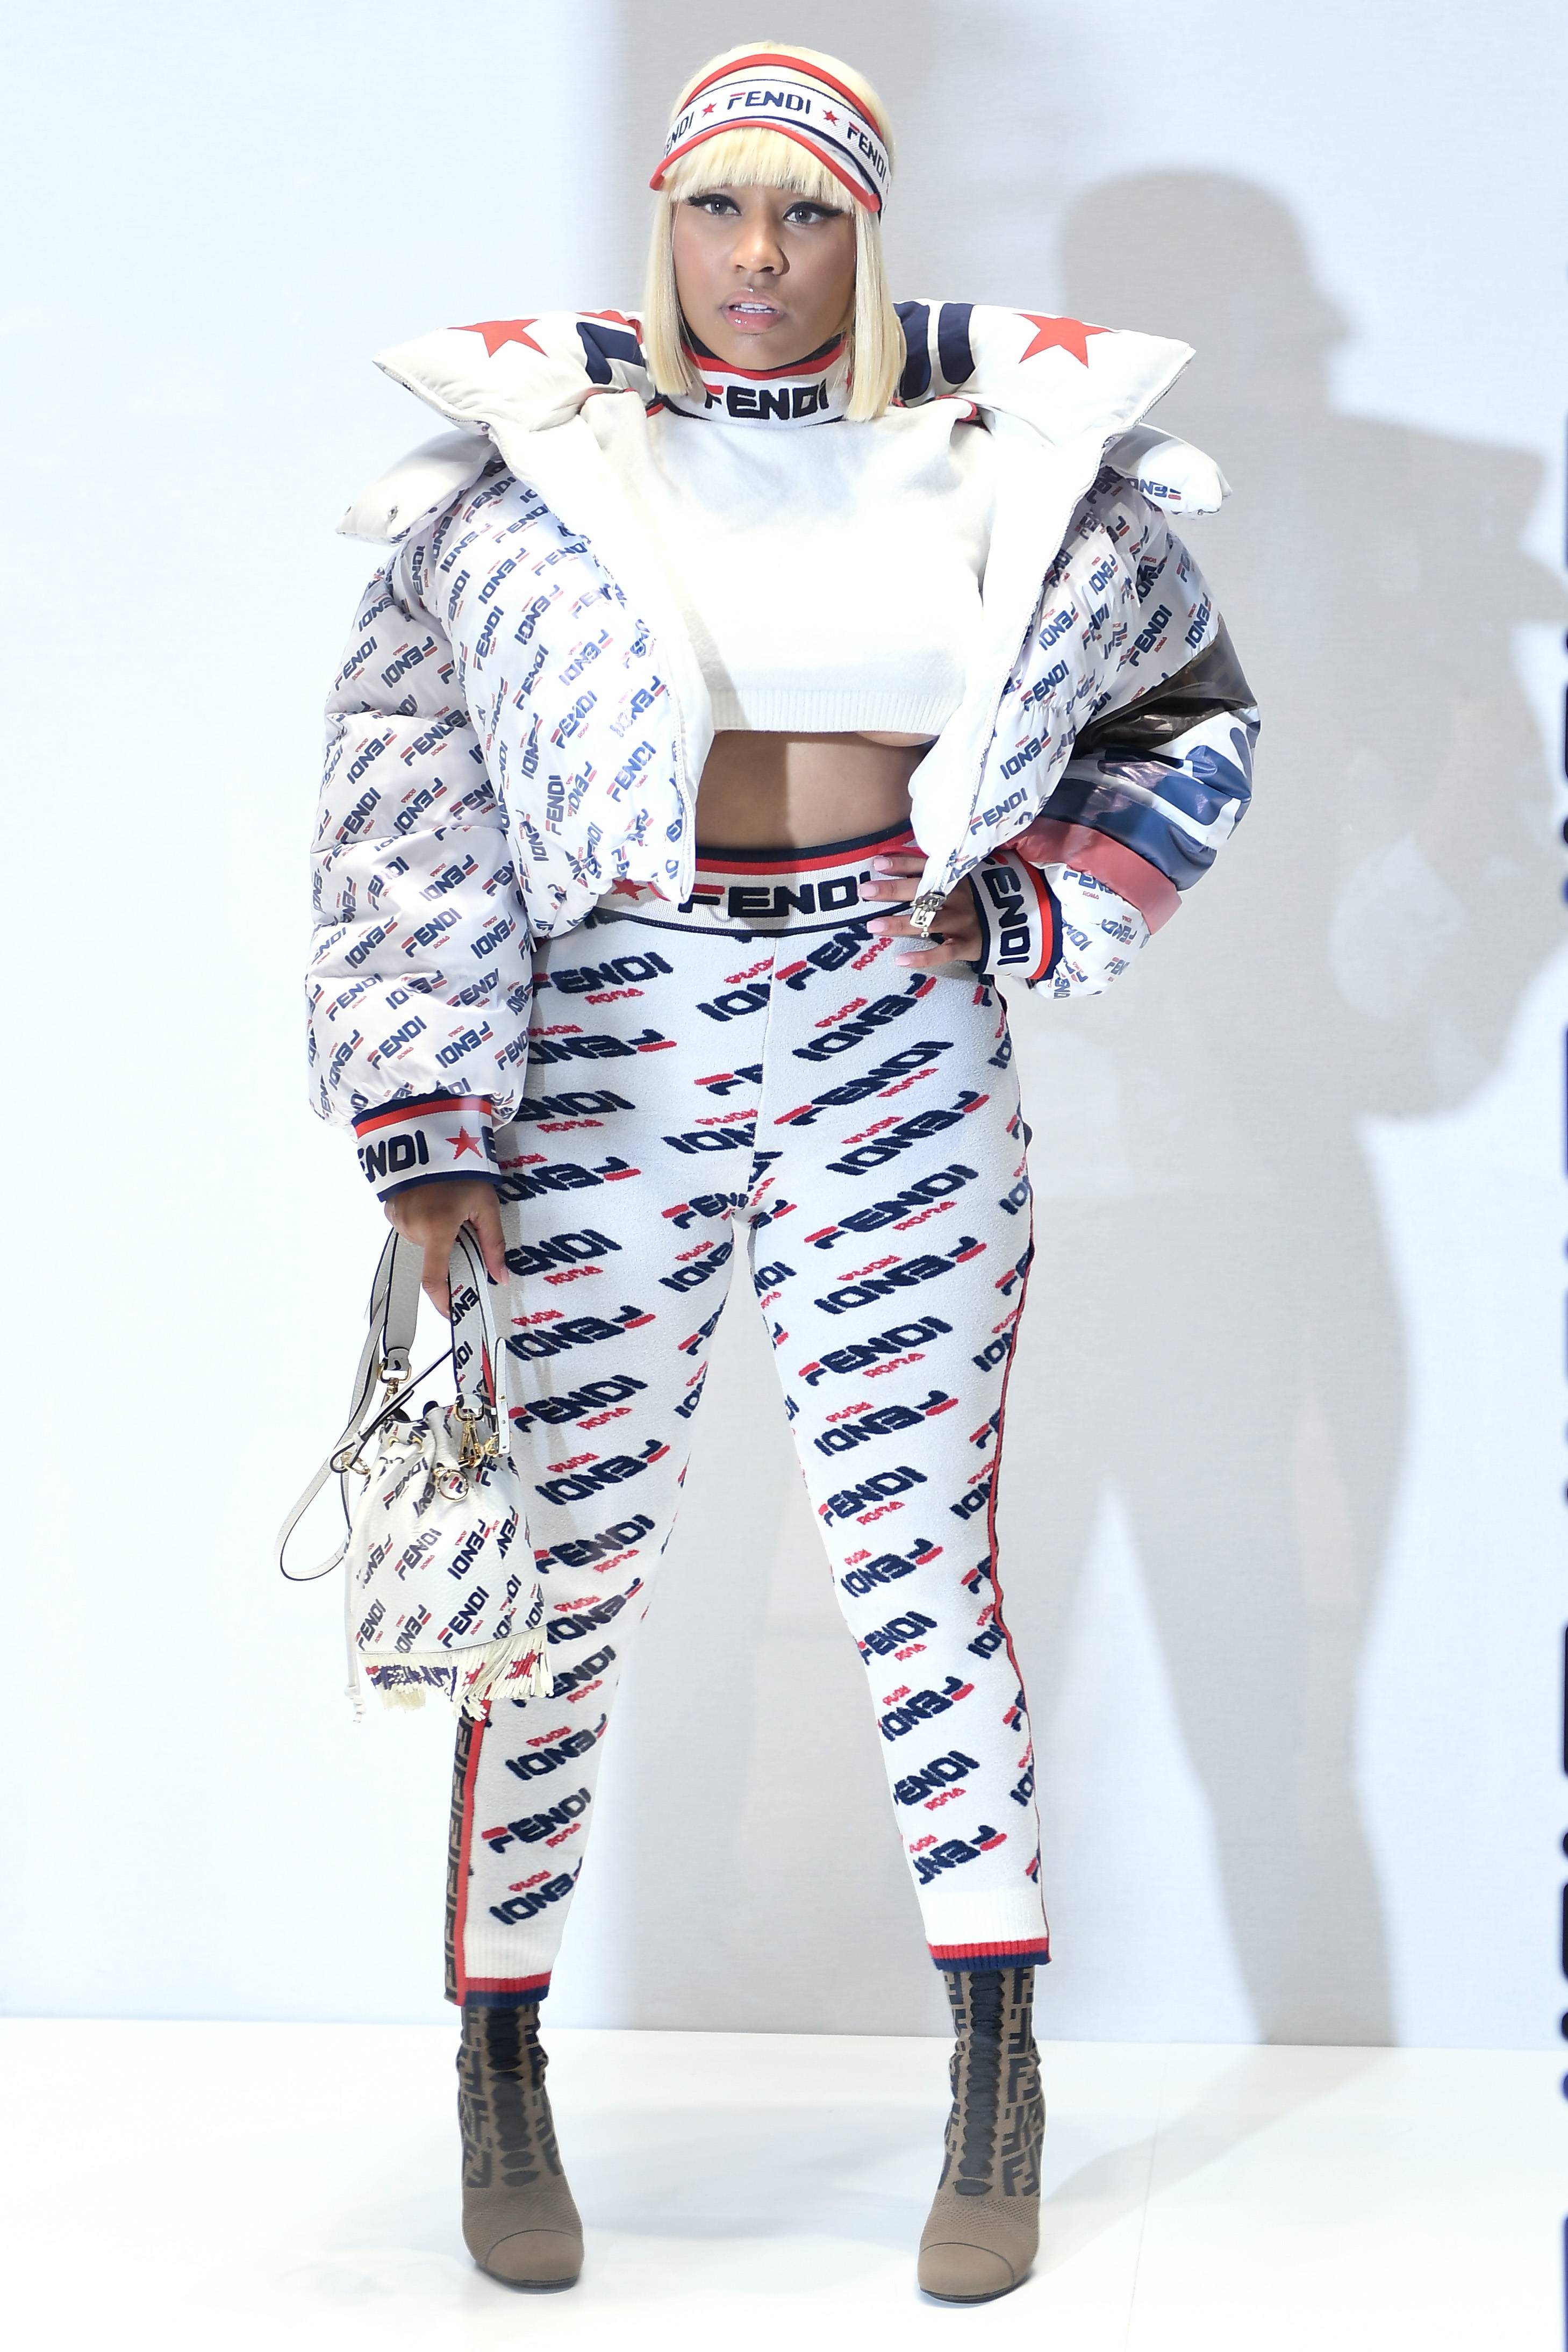 See The Best Things From Nicki Minaj's 'Fendi Prints On' Capsule Collection, News